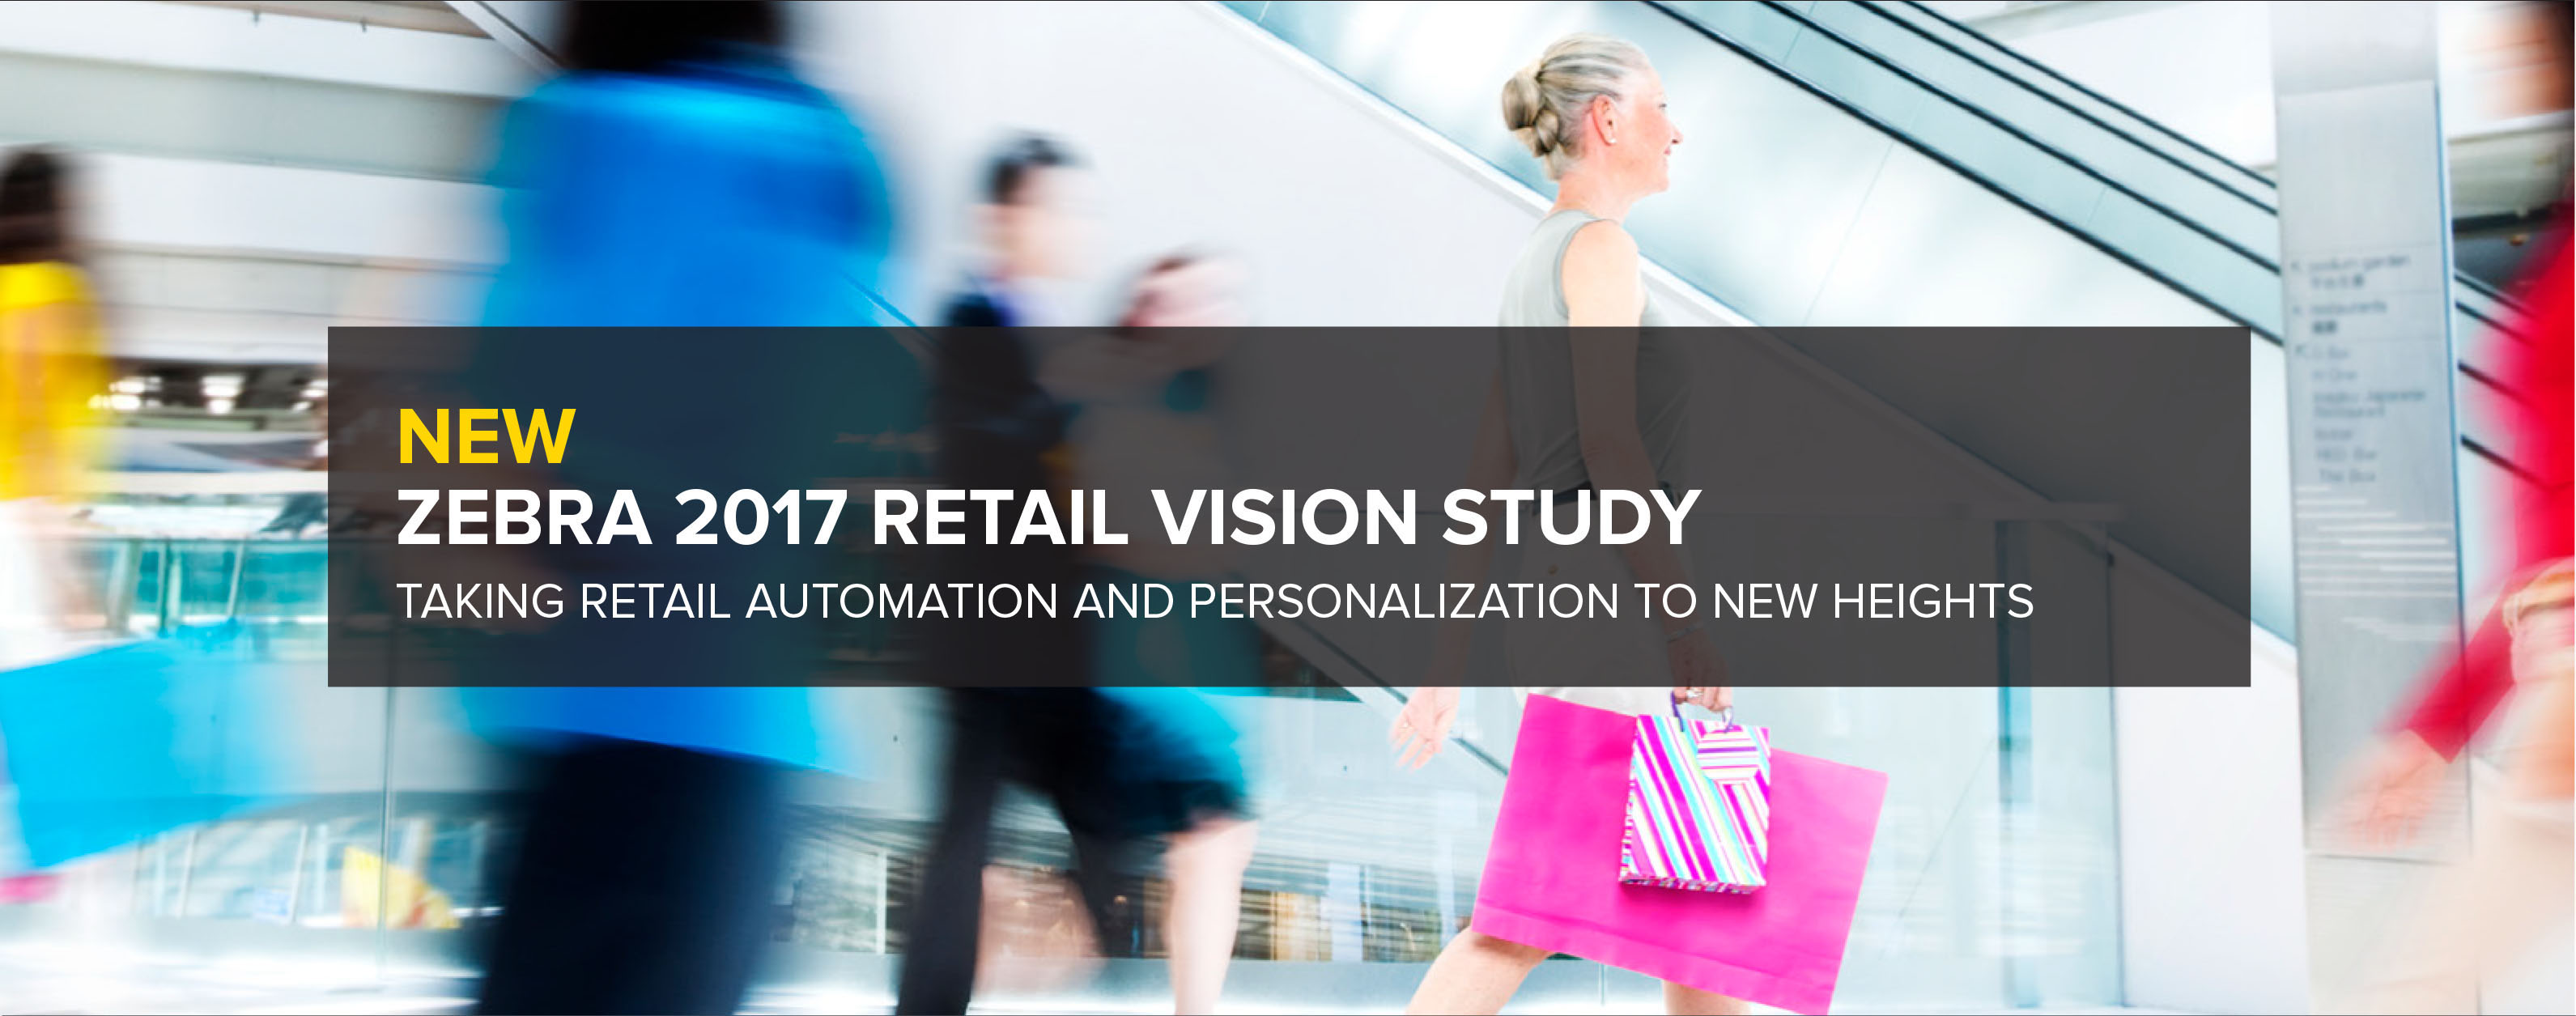 New Zebra 2017 Retail Vision Study – Taking Retail Automation and Personalization to New Heights 